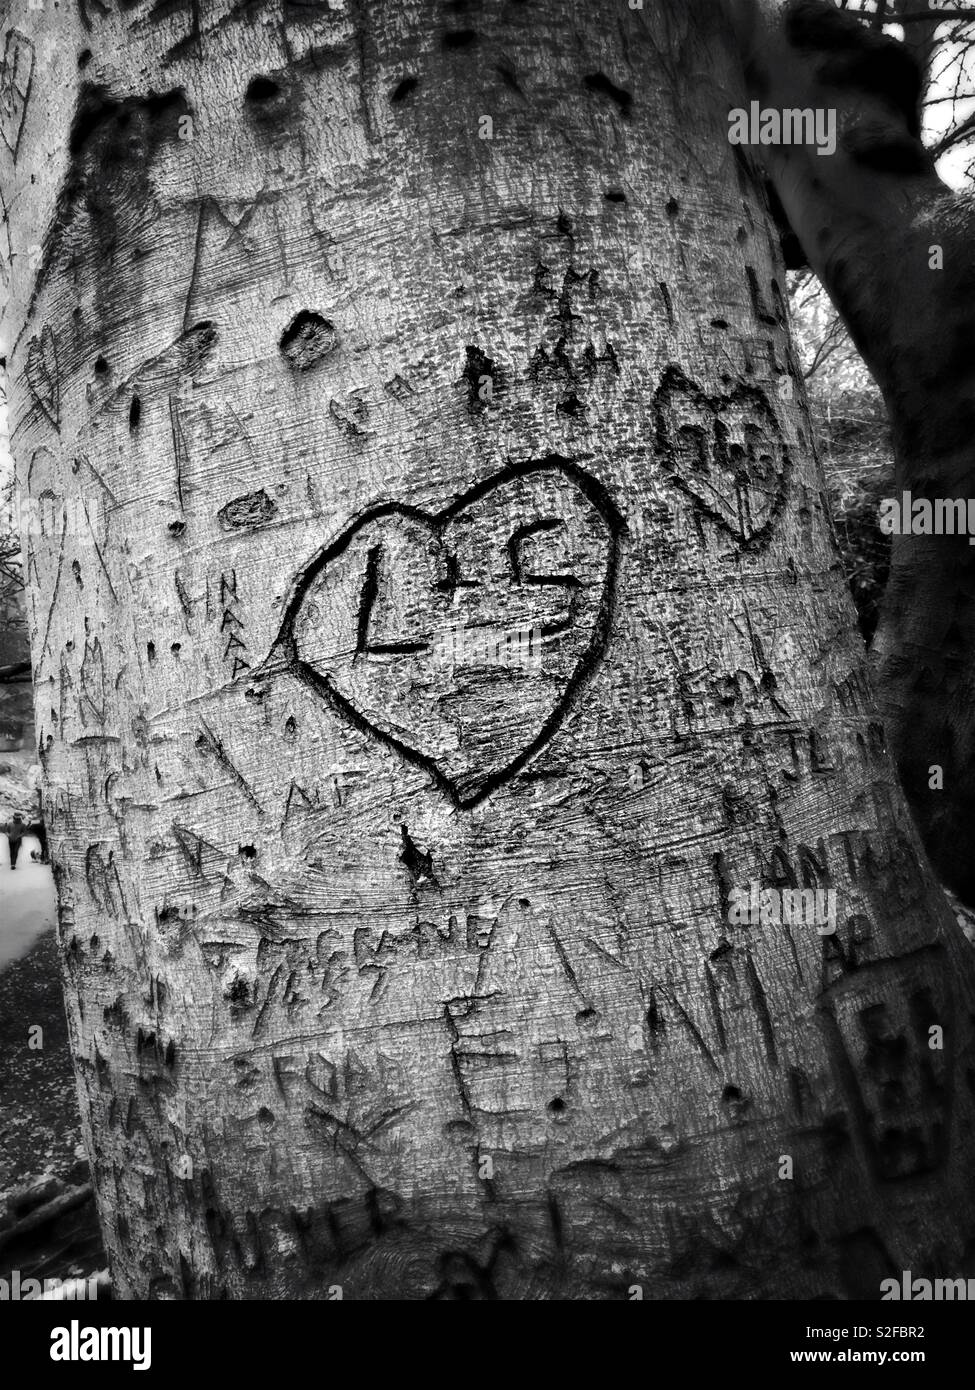 Initials in heart carved into tree trunk Stock Photo